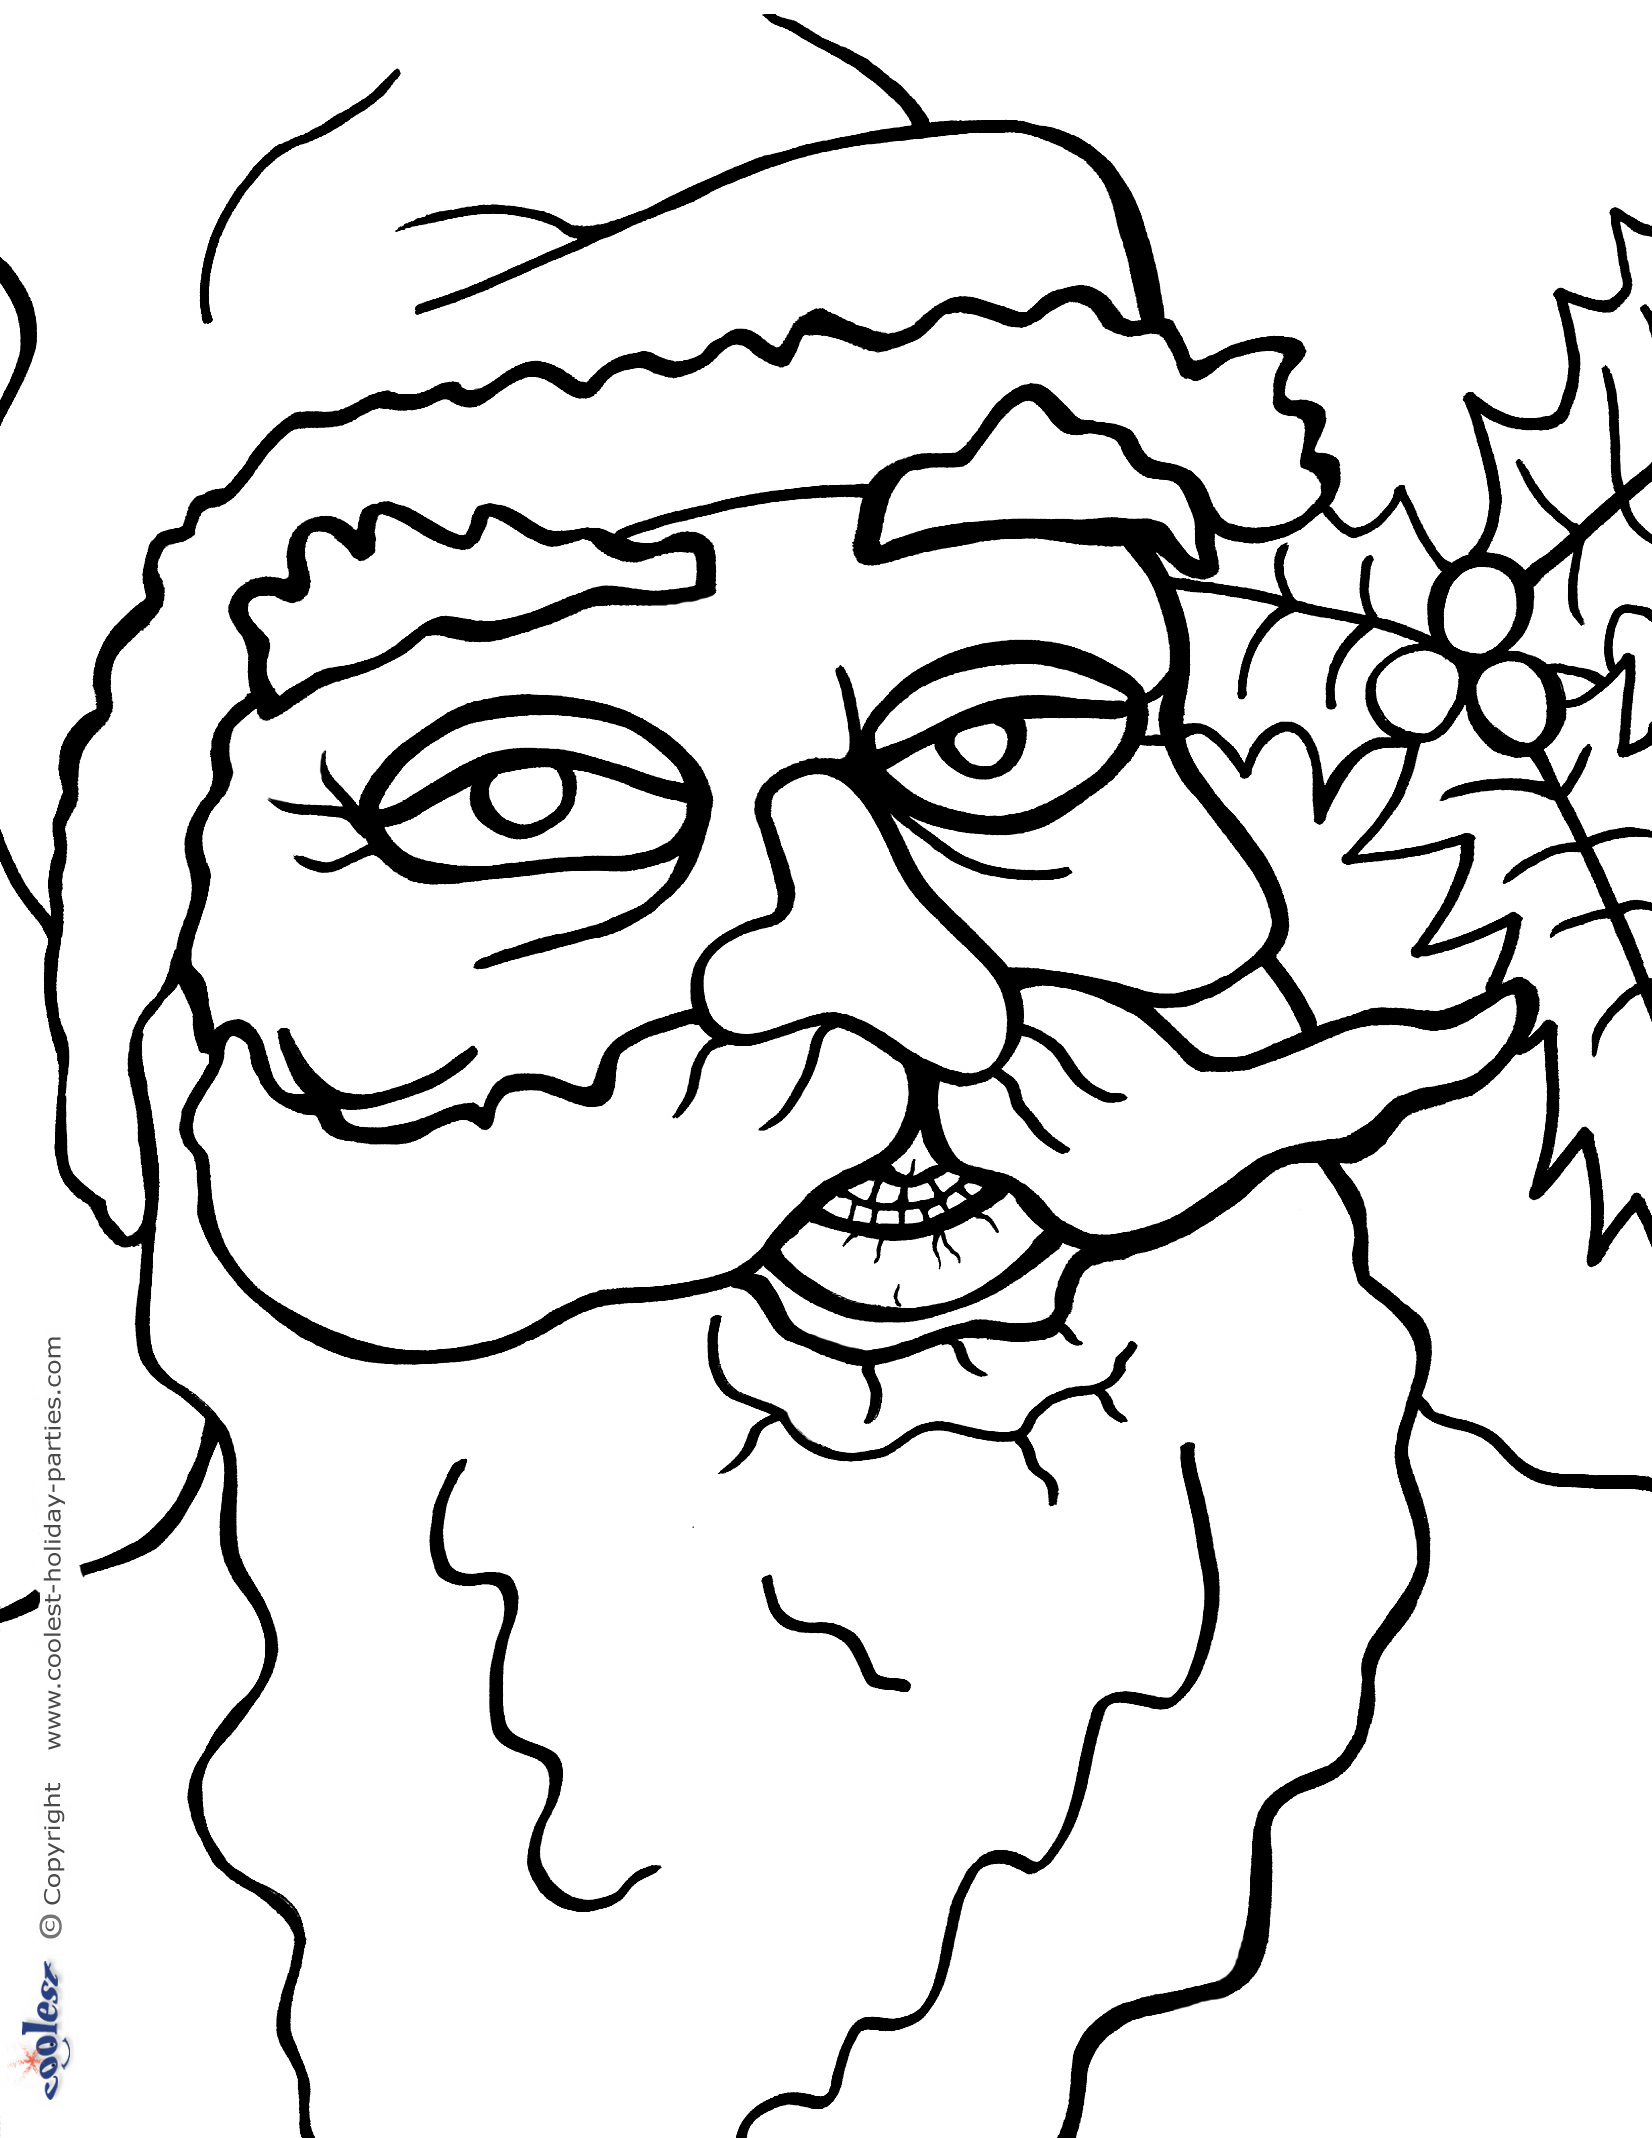 free-printable-christmas-coloring-pages-with-jokes-coloring-and-activity-pages-at-letters